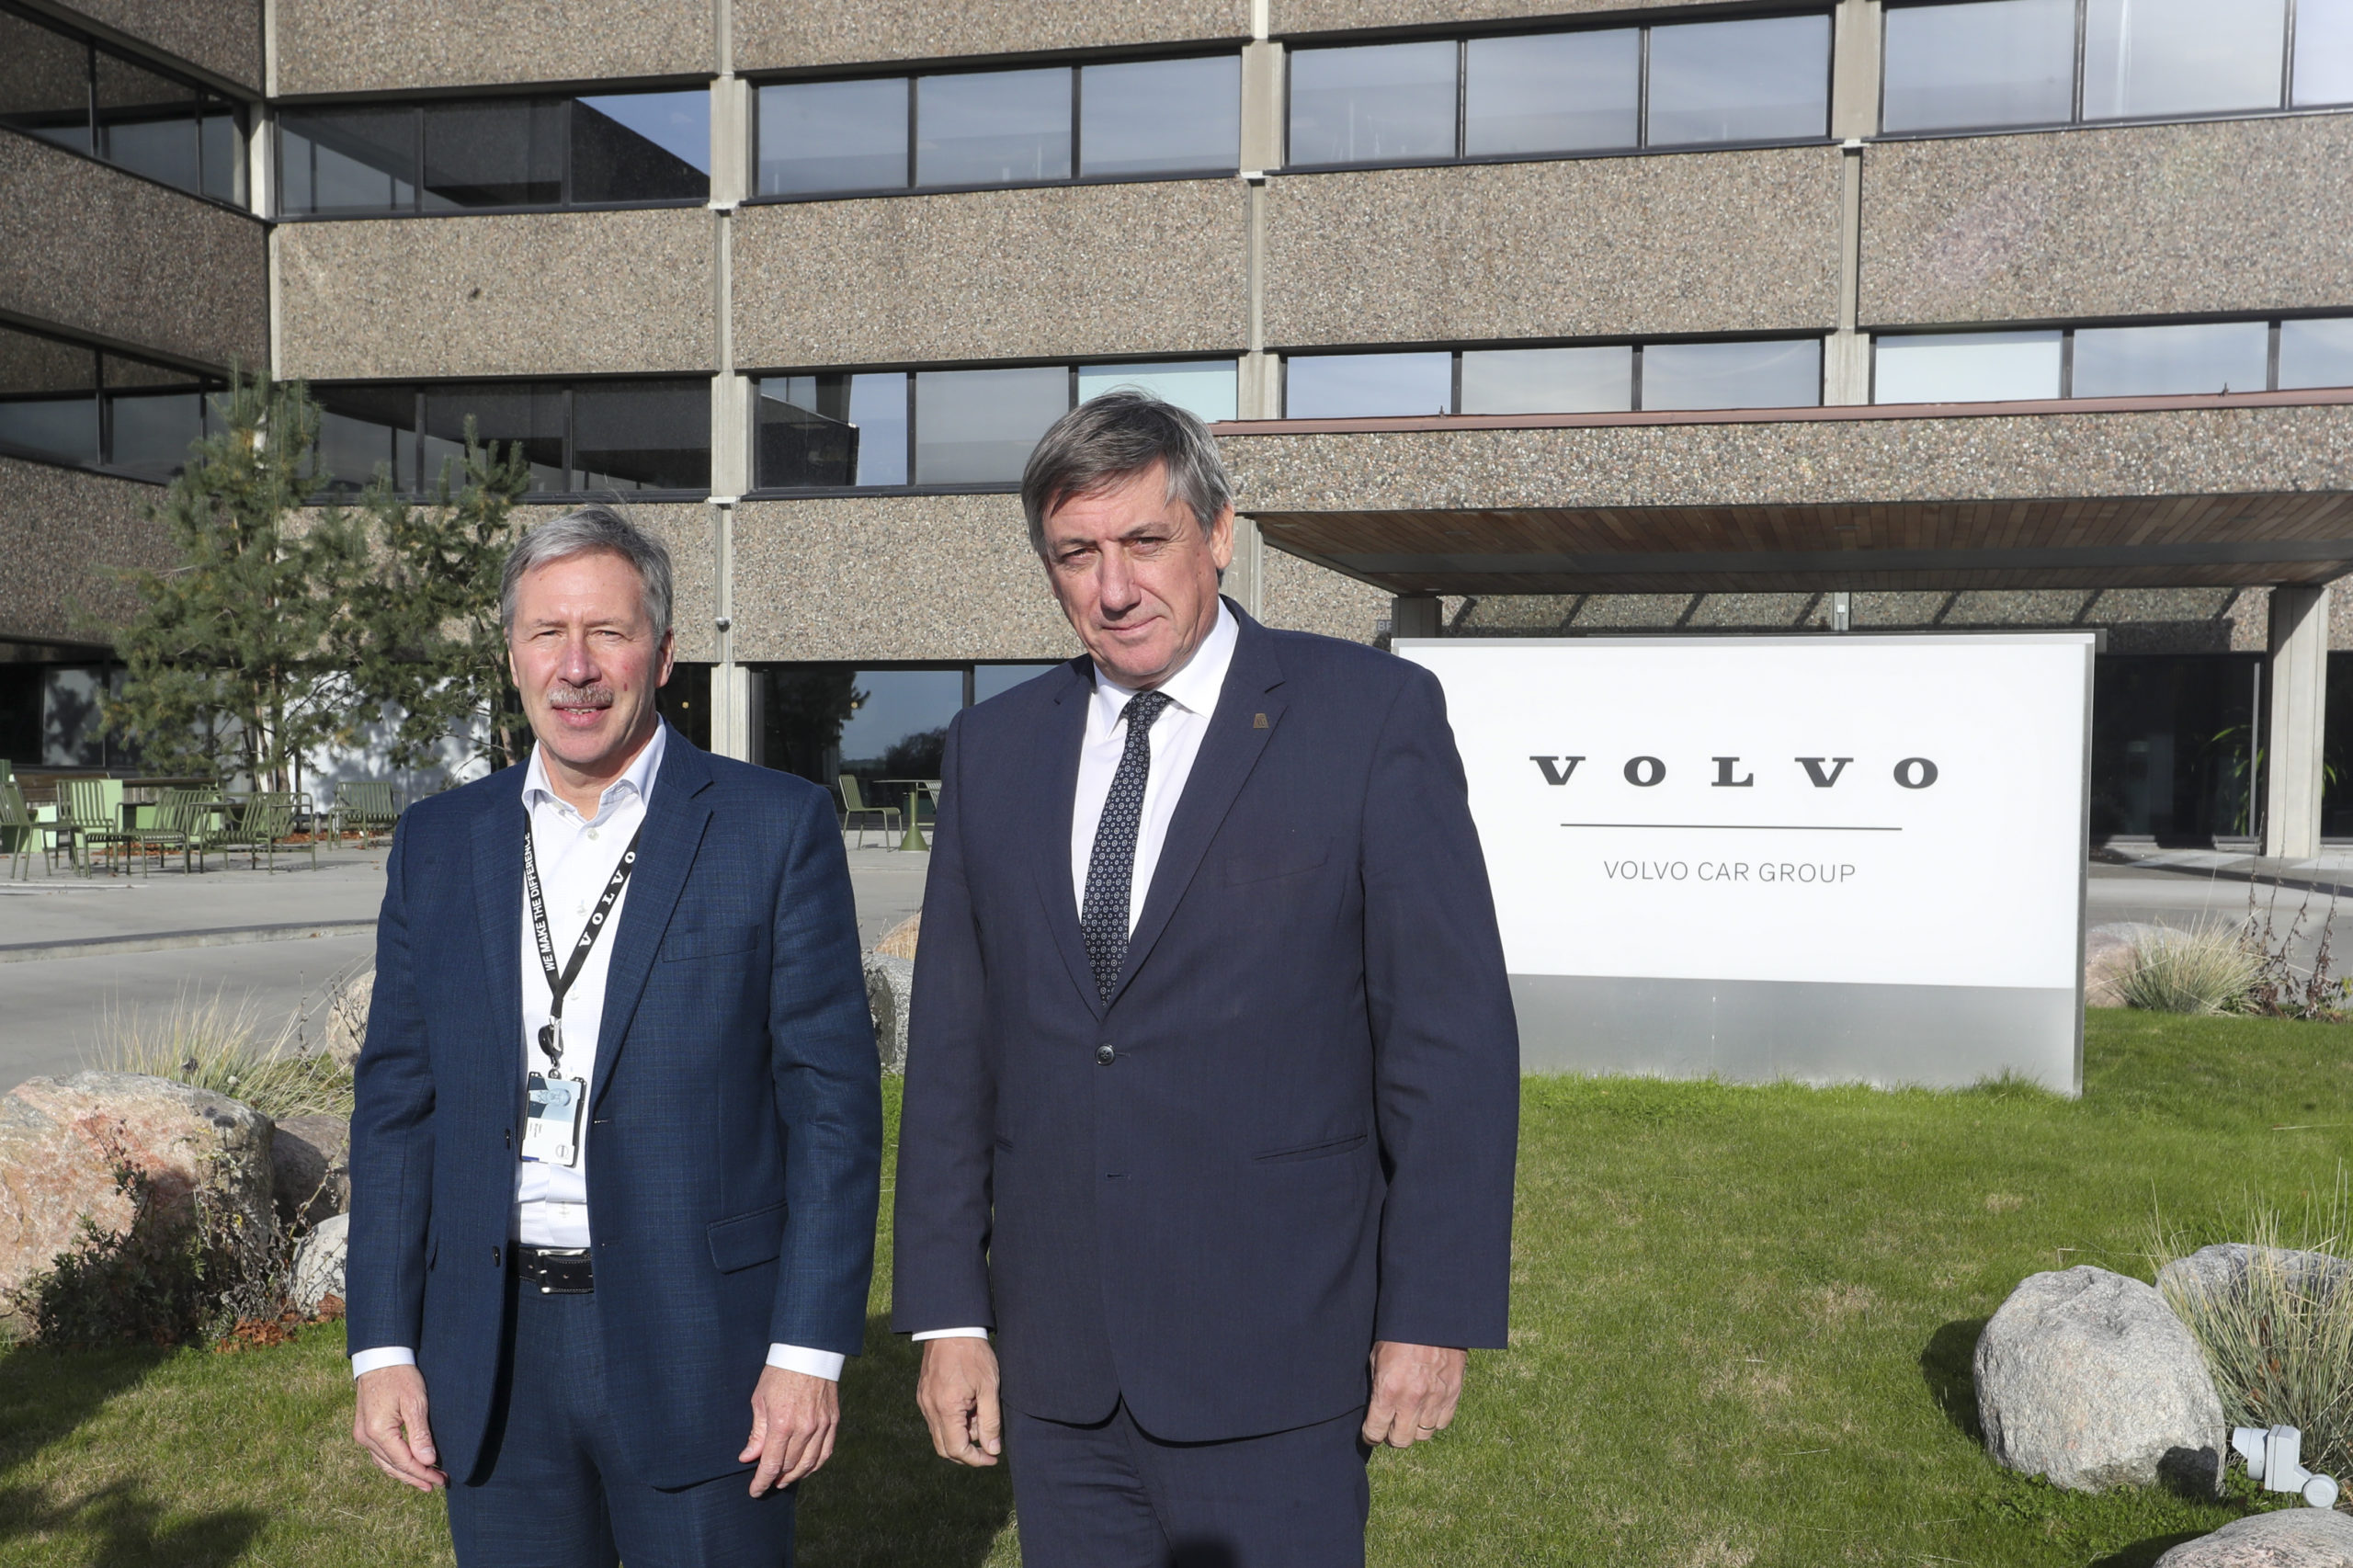 New Volvo battery plant in Ghent?